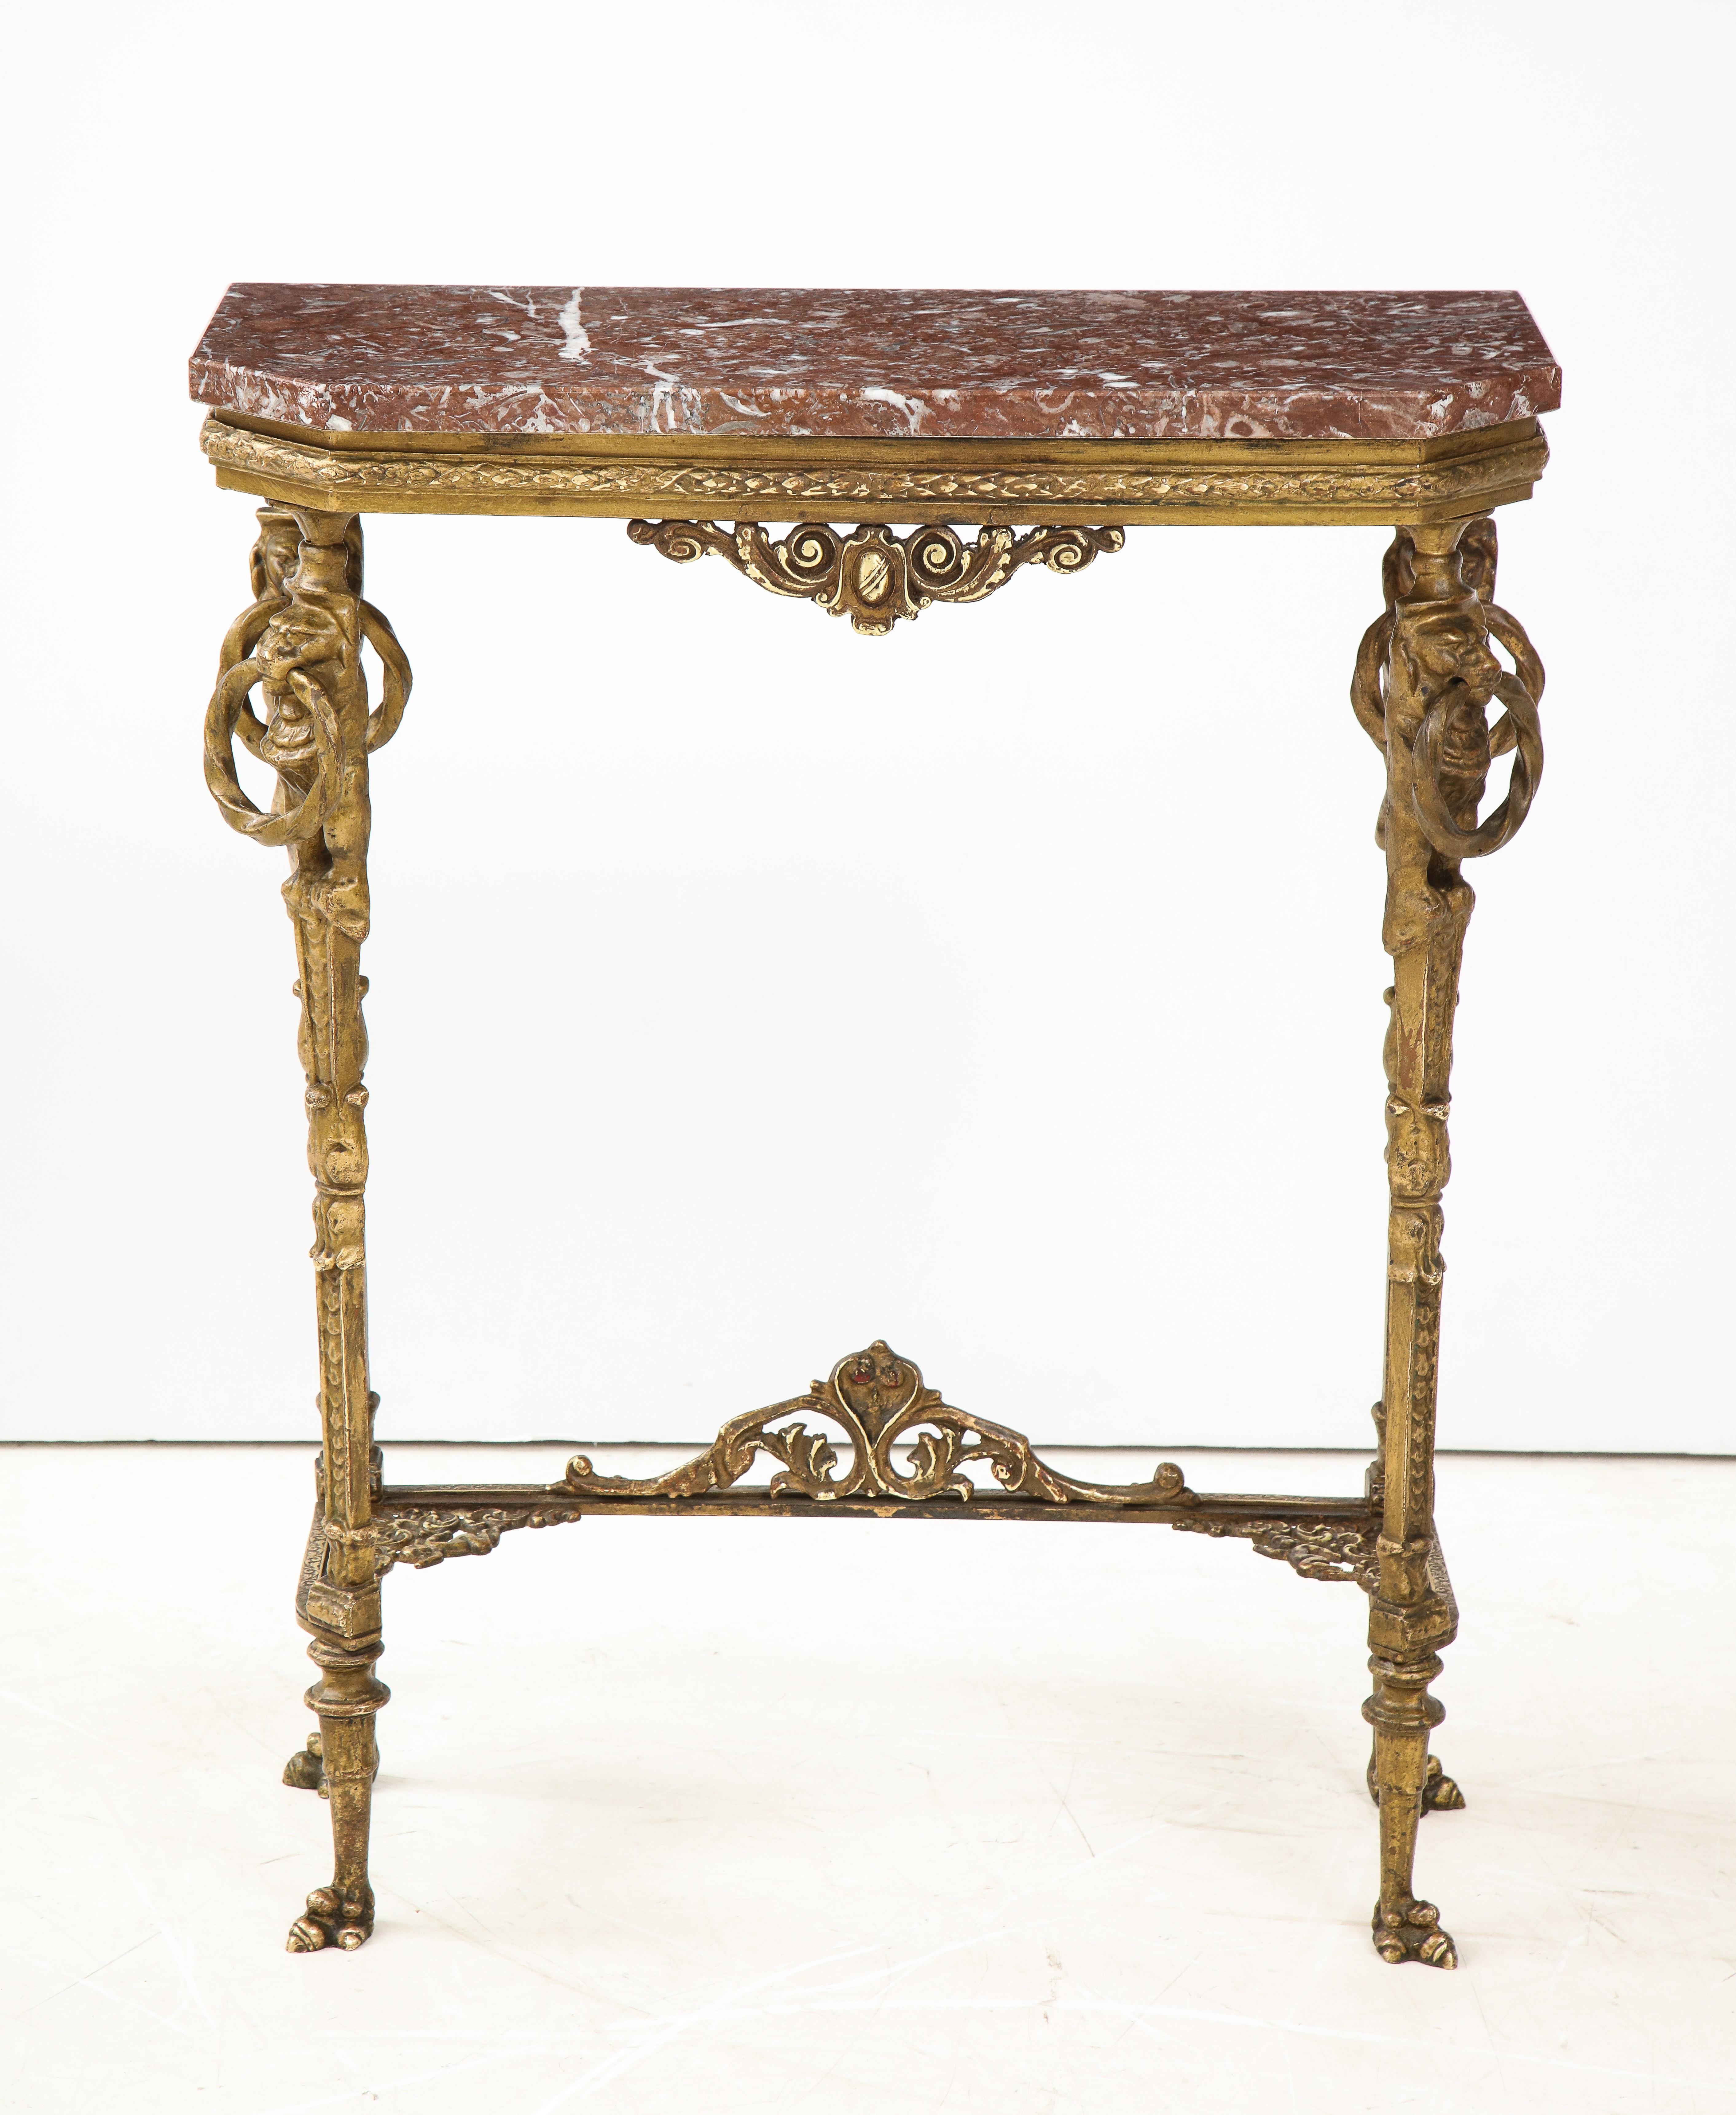 1940's bronze and marble French petite console with lion faces and feet motif, in vintage original condition with some wear and patina due to age and use.